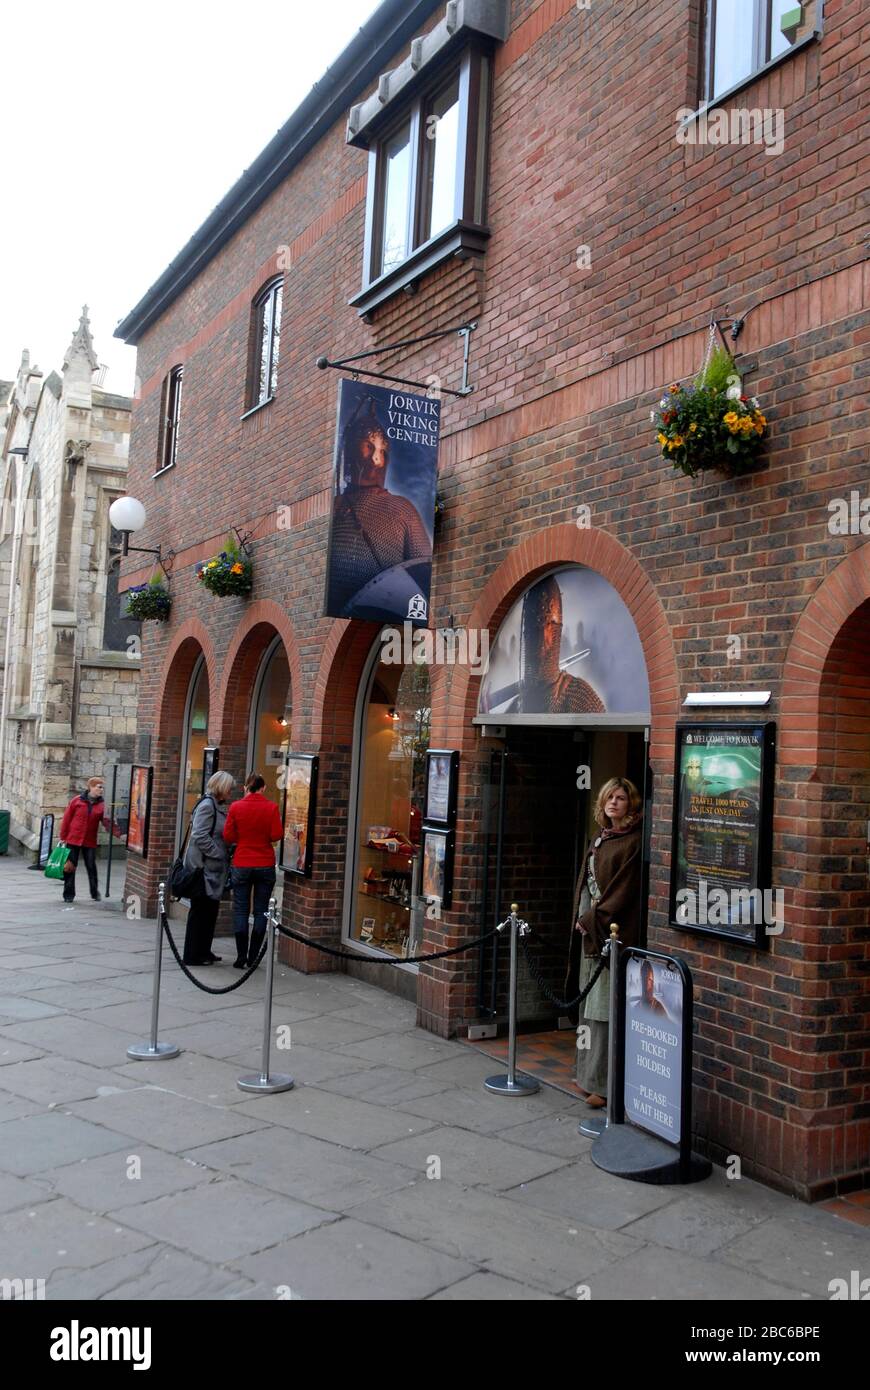 JORVIK Viking Centre (Viking museum)  in the Coppergate shopping Centre in York, Yorkshire, Britain.   The centre tells the story of life of invading Stock Photo